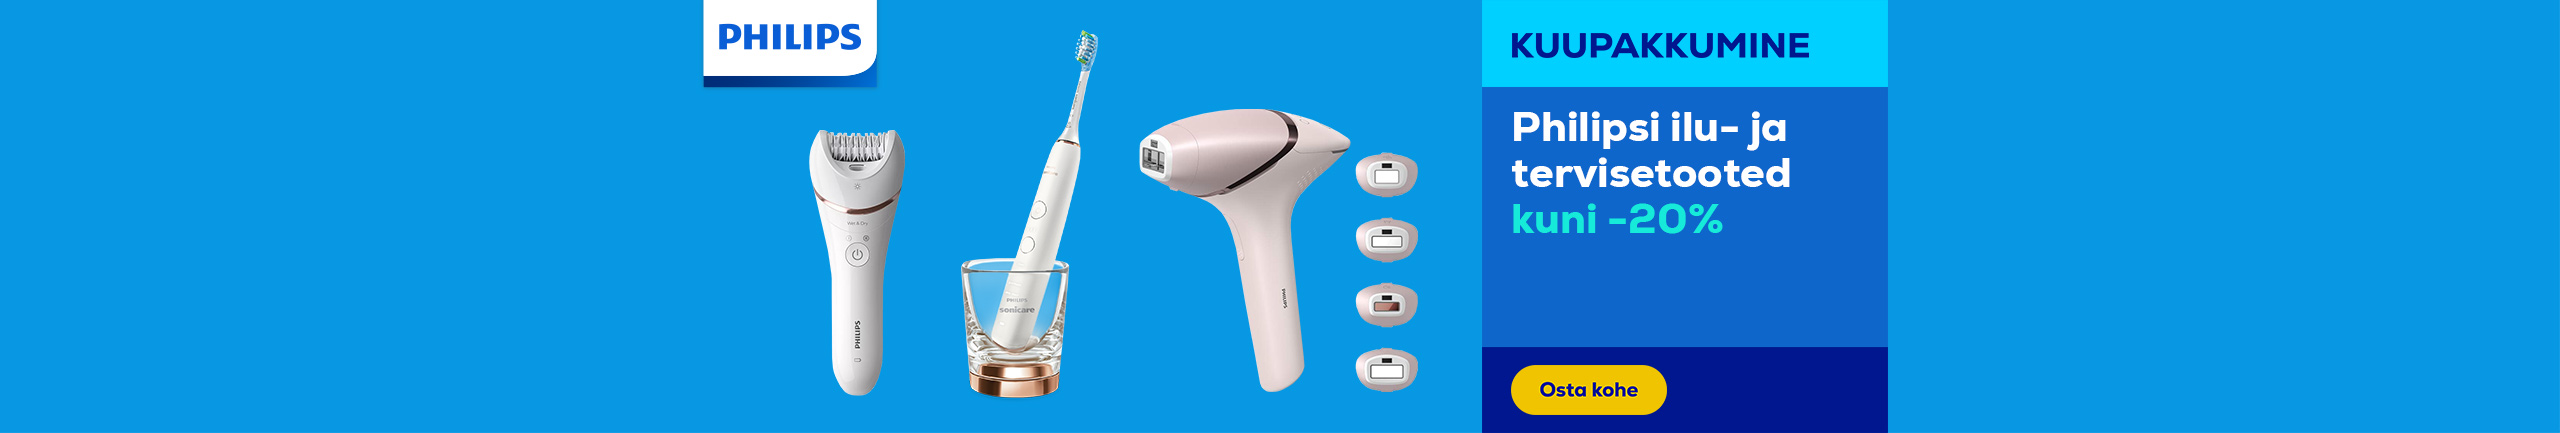 Philips beauty and health products up to -20%